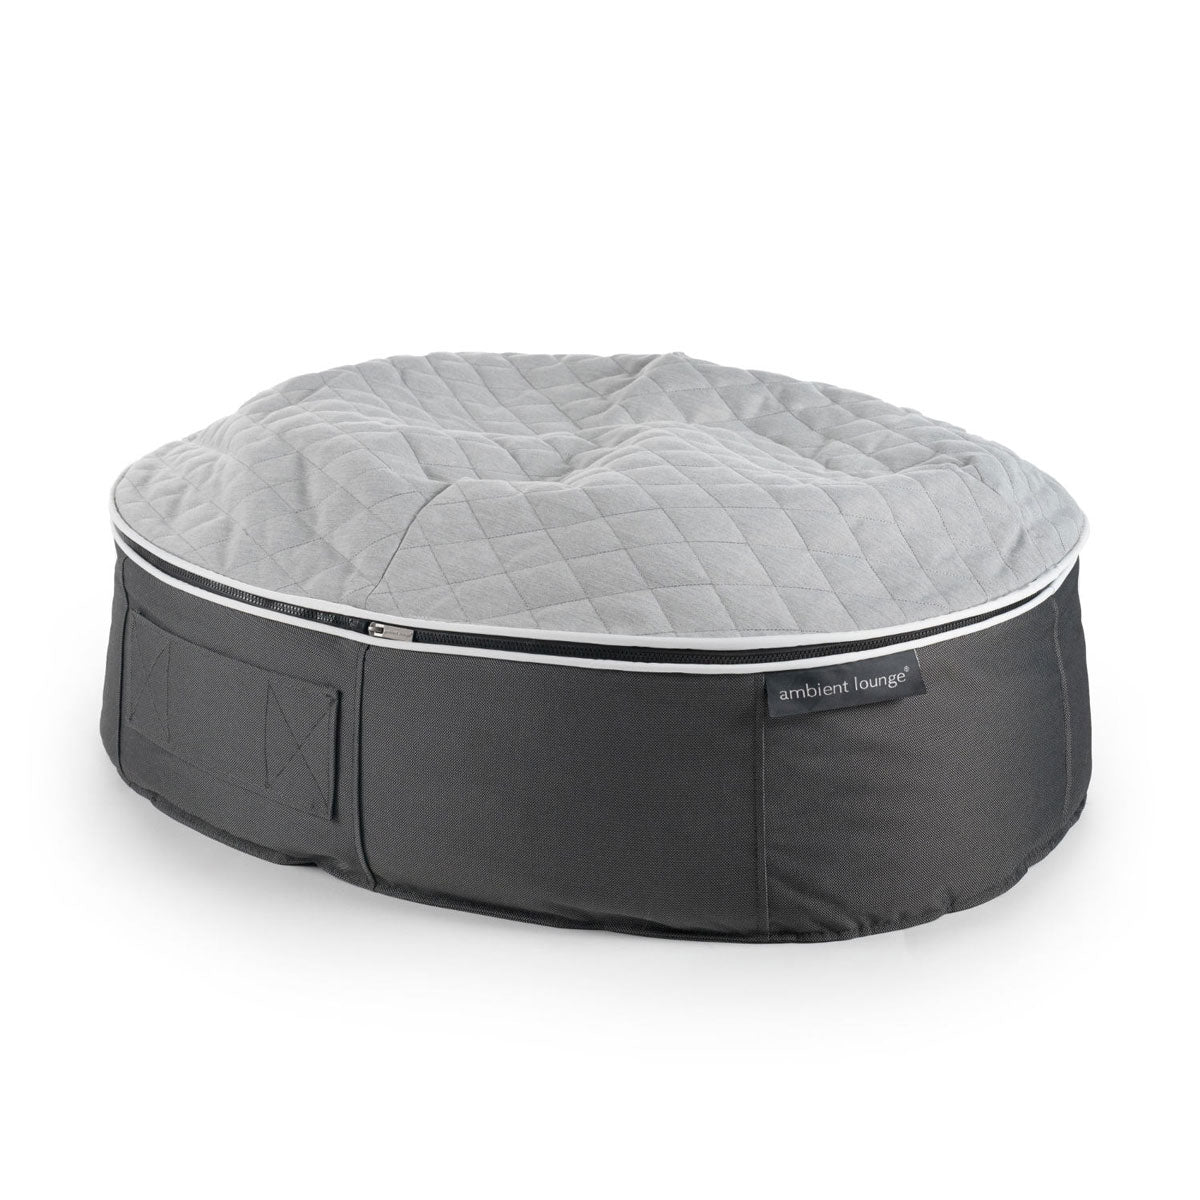 Hundeseng ThermoQuilt Medium Ambient Lounge